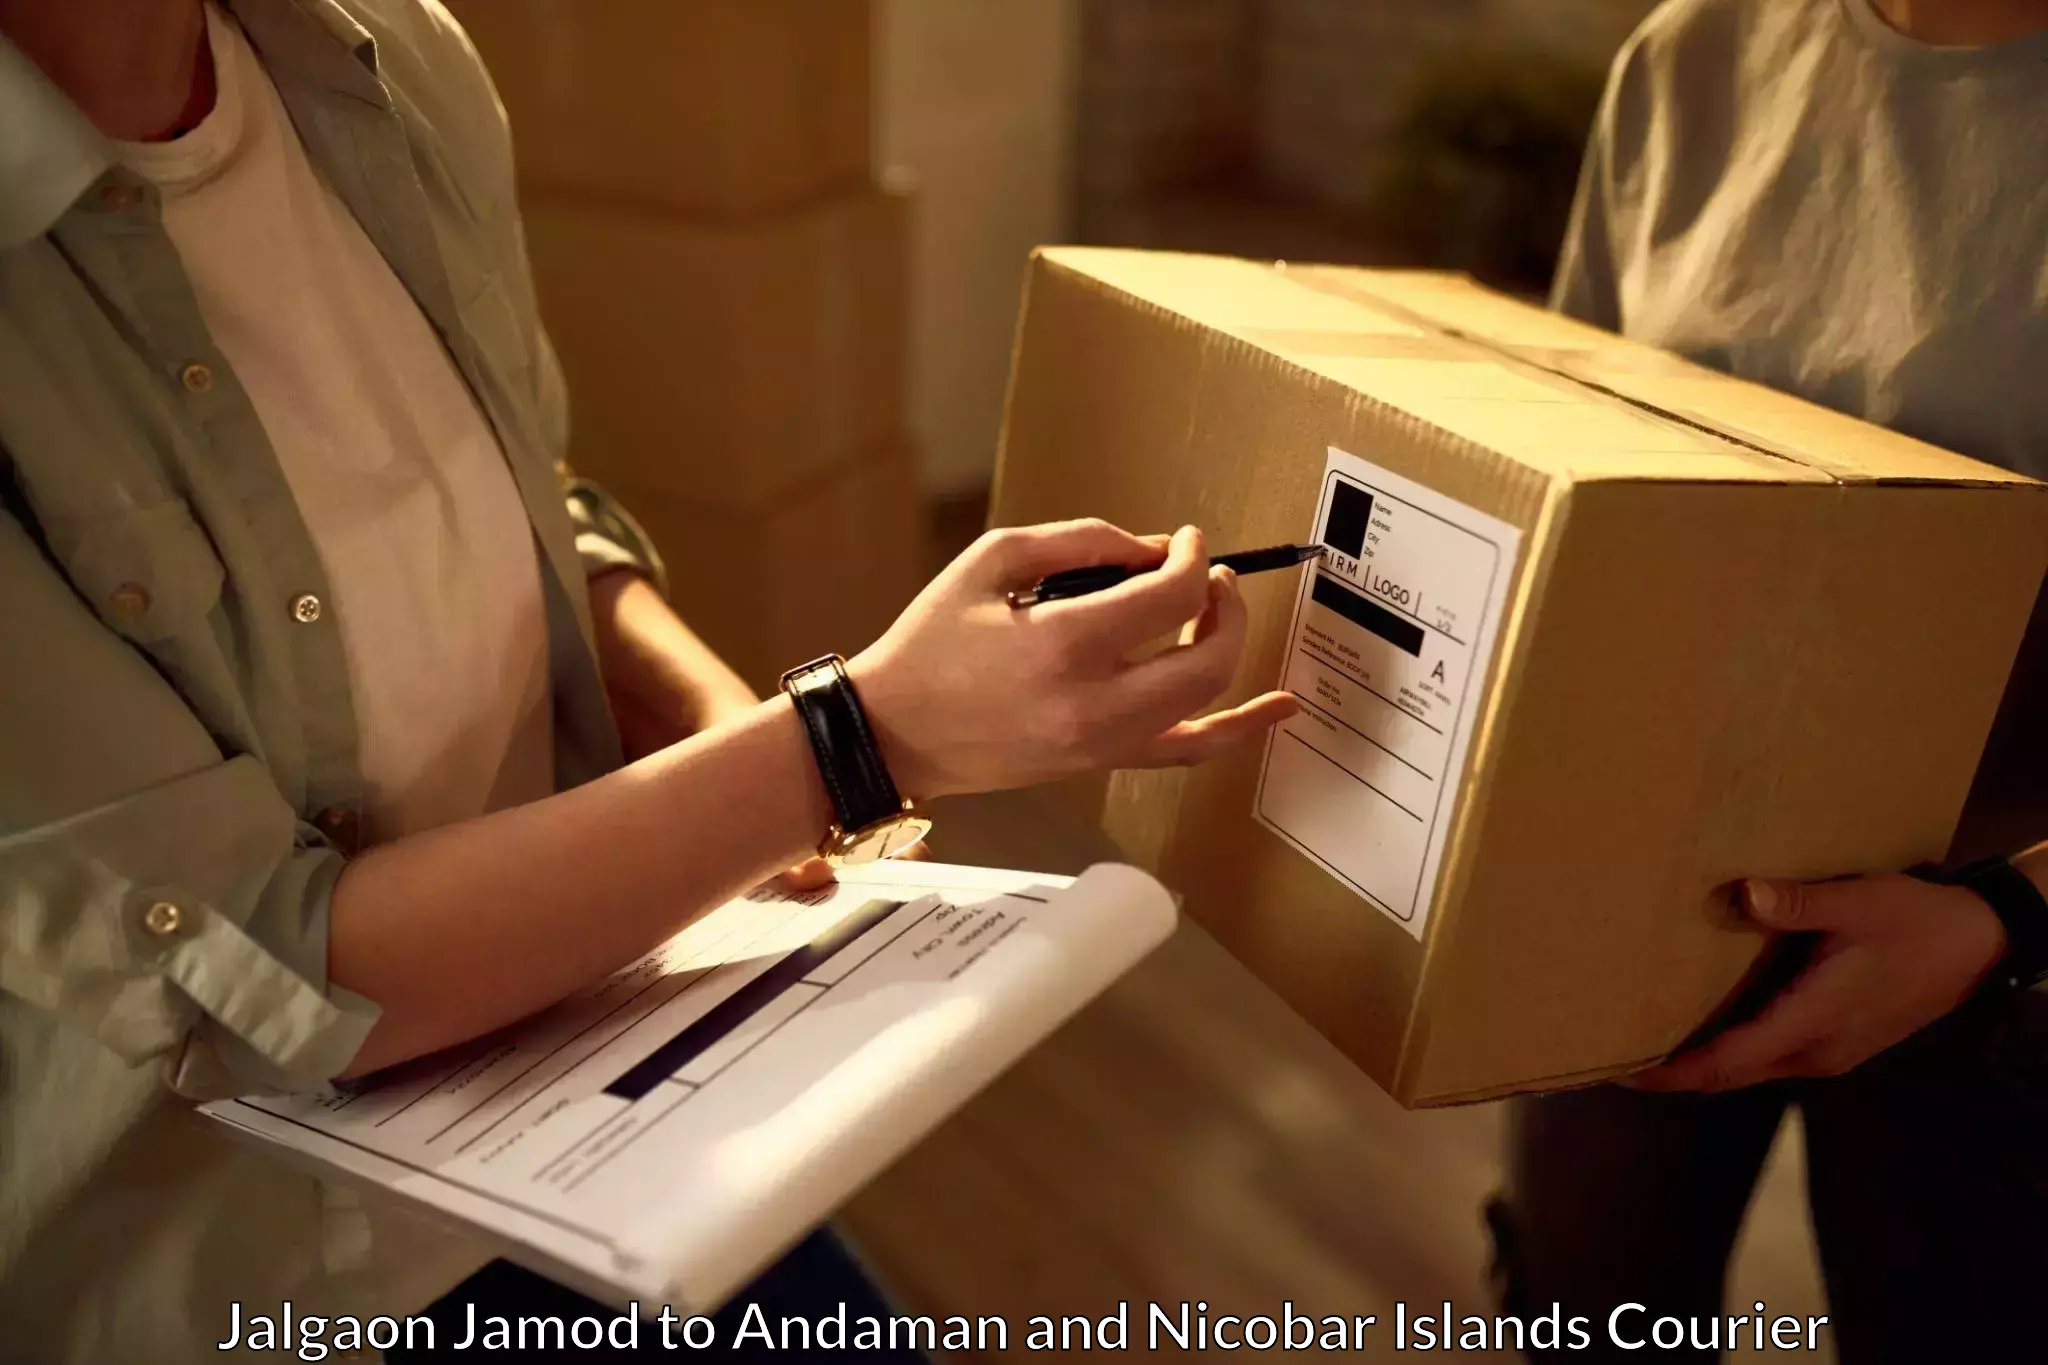 Reliable parcel services in Jalgaon Jamod to Andaman and Nicobar Islands